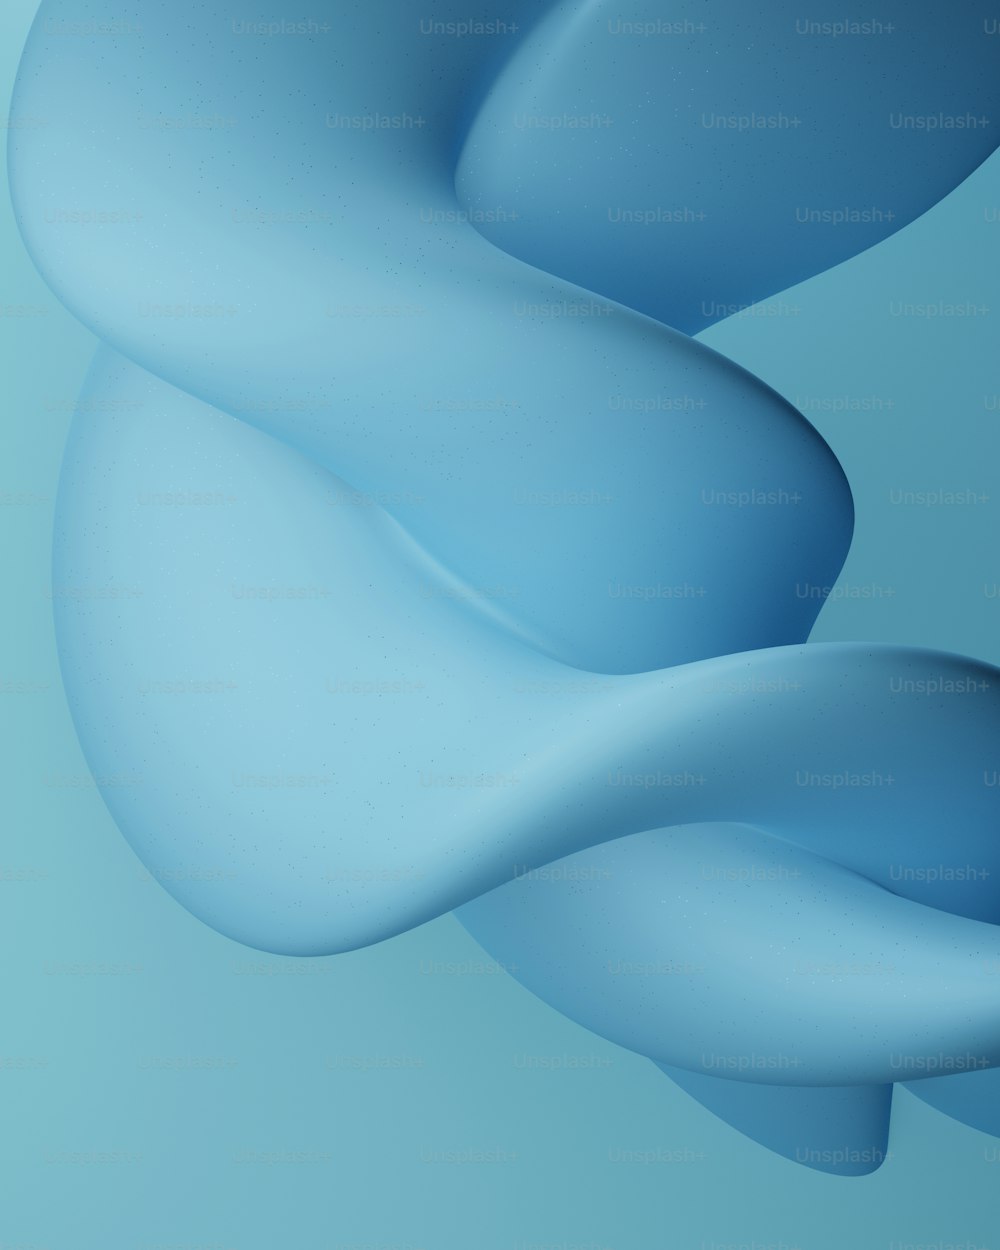 a close up of a blue object on a blue background